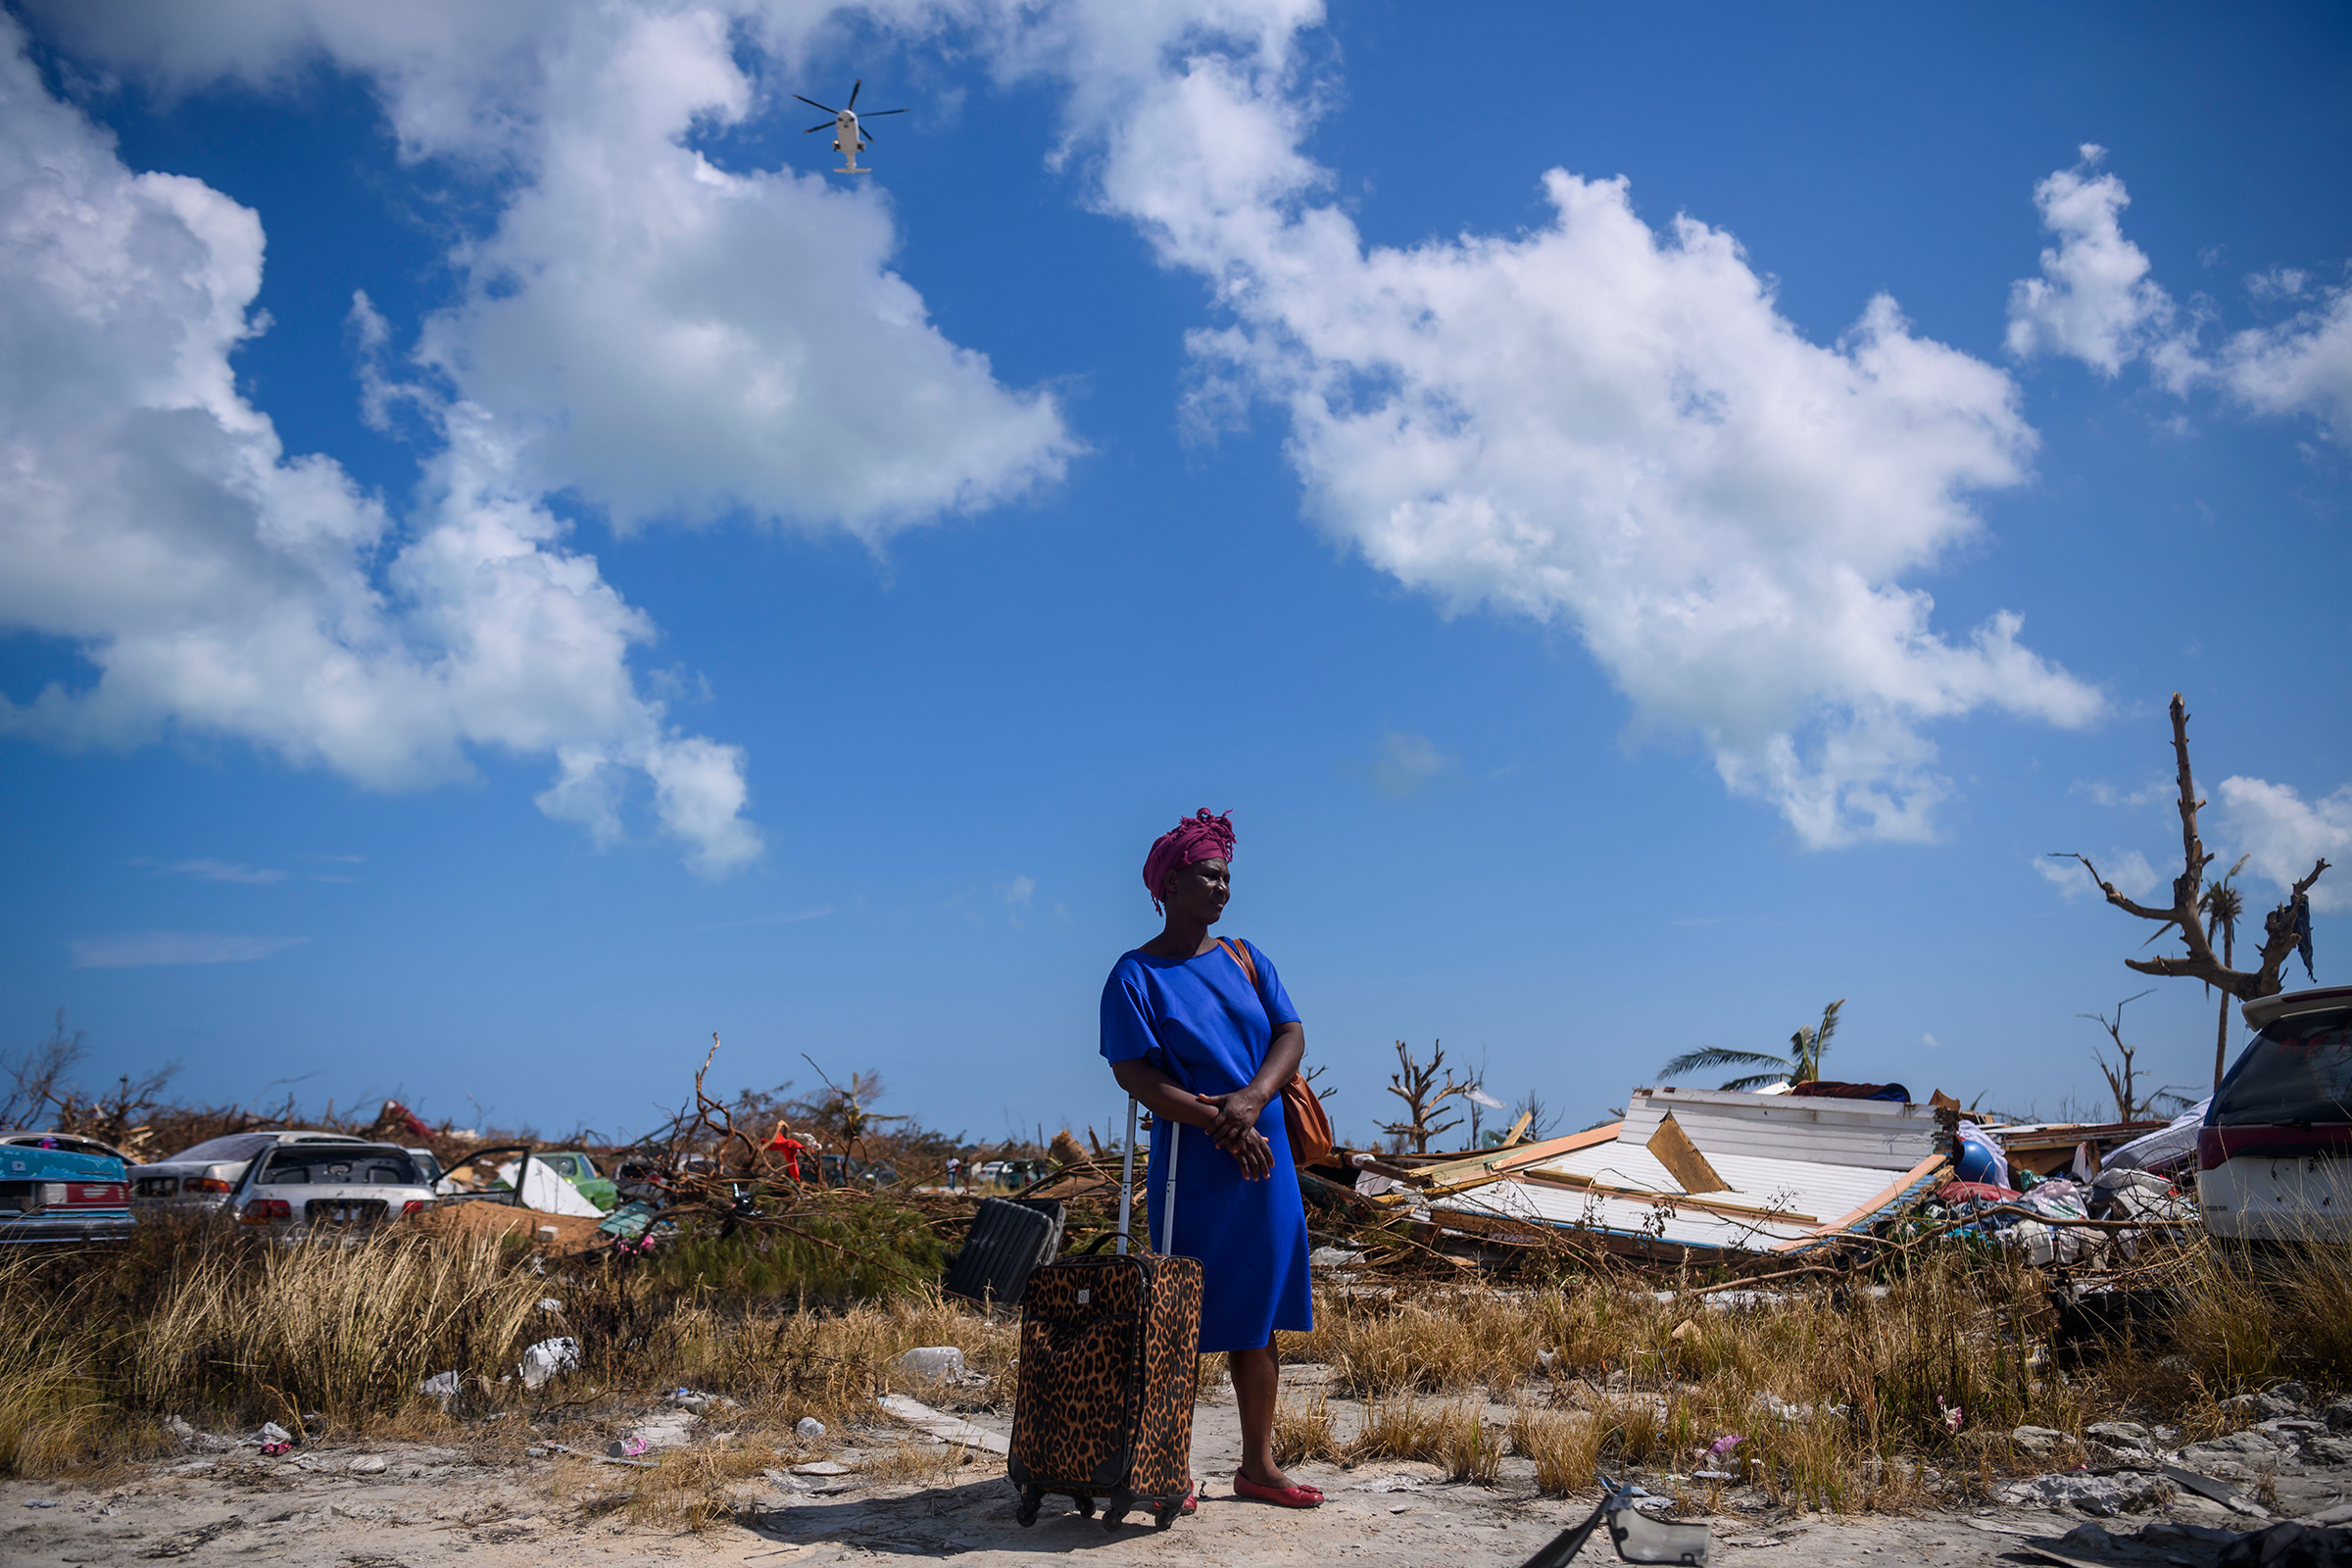 Dejani Louistan, who was displaced by Hurricane Dorian, stands with the only belongings she managed to salvage amid the destruction left in the Mudd neighborhood of Marsh Harbour, Bahamas on September 7, 2019. (Carolyn Van Houten—The Washington Post via Getty Images)